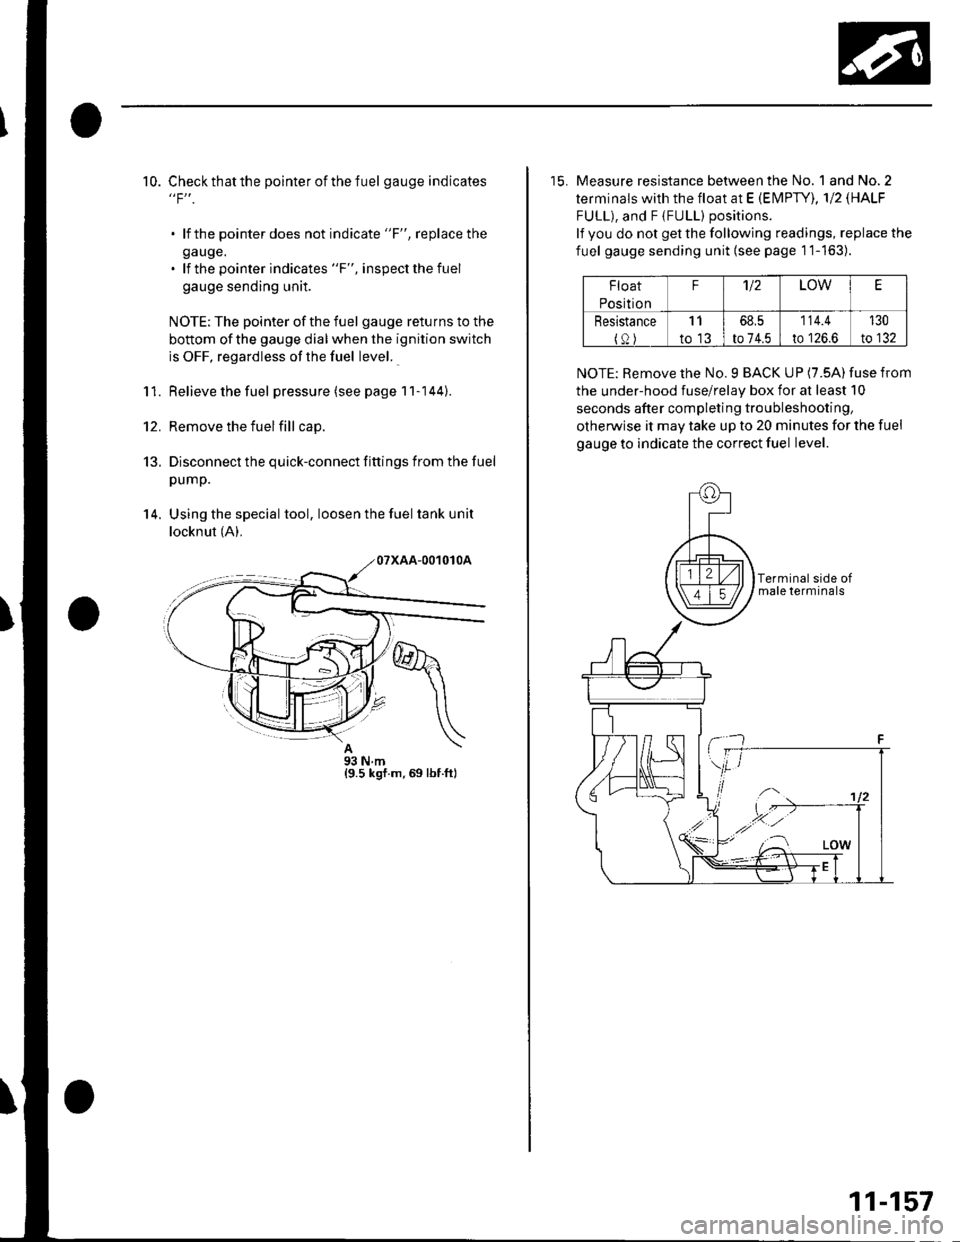 HONDA CIVIC 2002 7.G Service Manual 10. Checkthatthe pointerof thefuel gauge indicates"F".
. lf the pointer does not indicate "F", replace the
ga uge.. lf the pointer indicates "F", inspect the fuel
gauge sending unit.
NOTE: The pointer